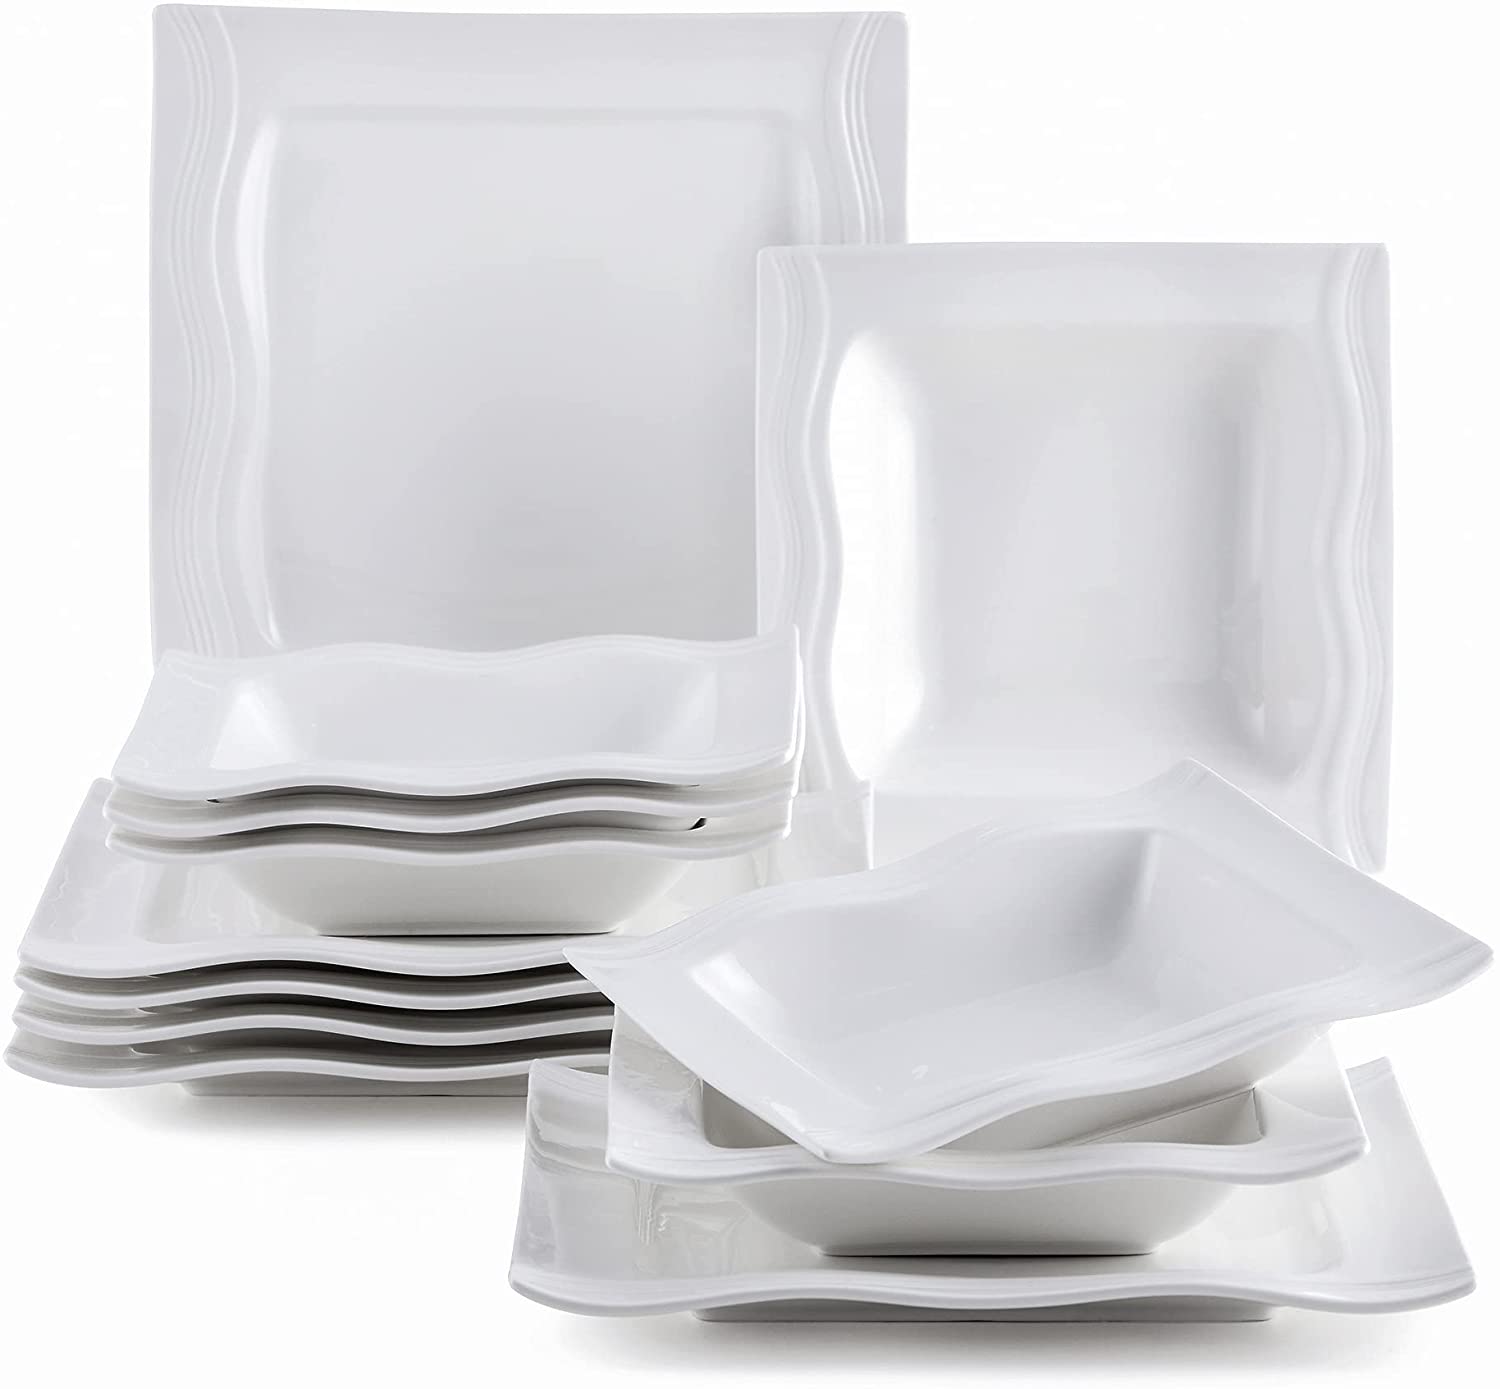 MALACASA, Mario Series Cream White Porcelain Dinner Service 12 Pieces Crockery Set with 6 Dinner Plates 6 Soup Plates for 6 People